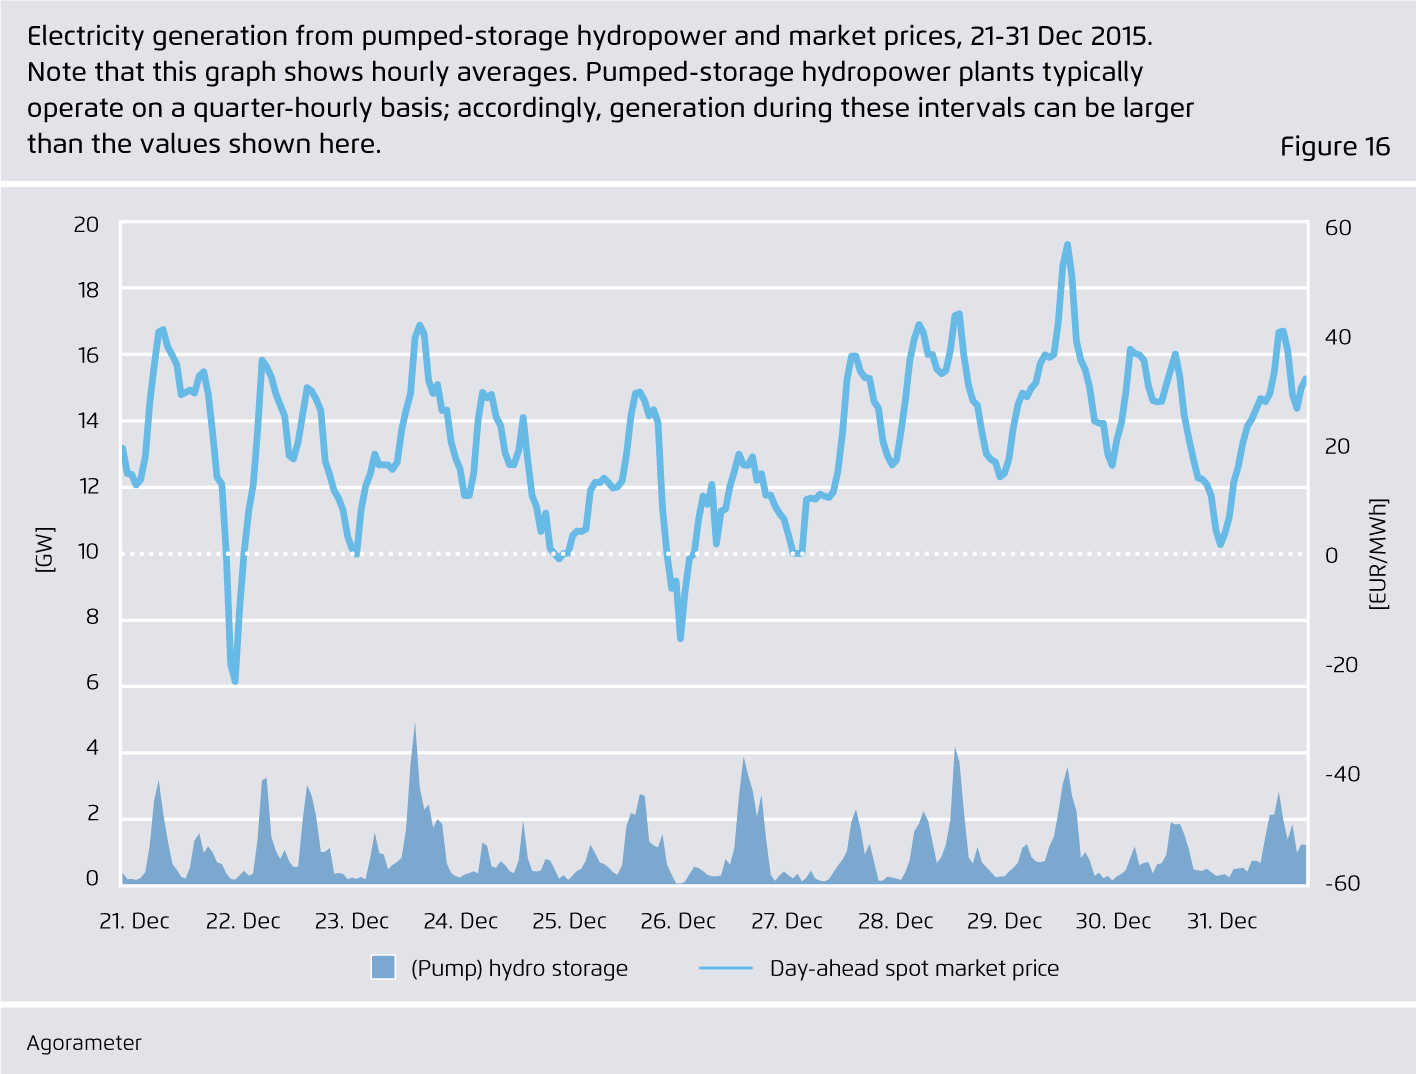 Preview for Electricity generation from pumped-storage hydropower and market prices, 21-31 Dec 2015...Note that this graph shows hourly averages. Pumped-storage hydropower plants typically operate on a quarter-hourly basis; accordingly, generation during these intervals can be larger than the values shown here.   ..